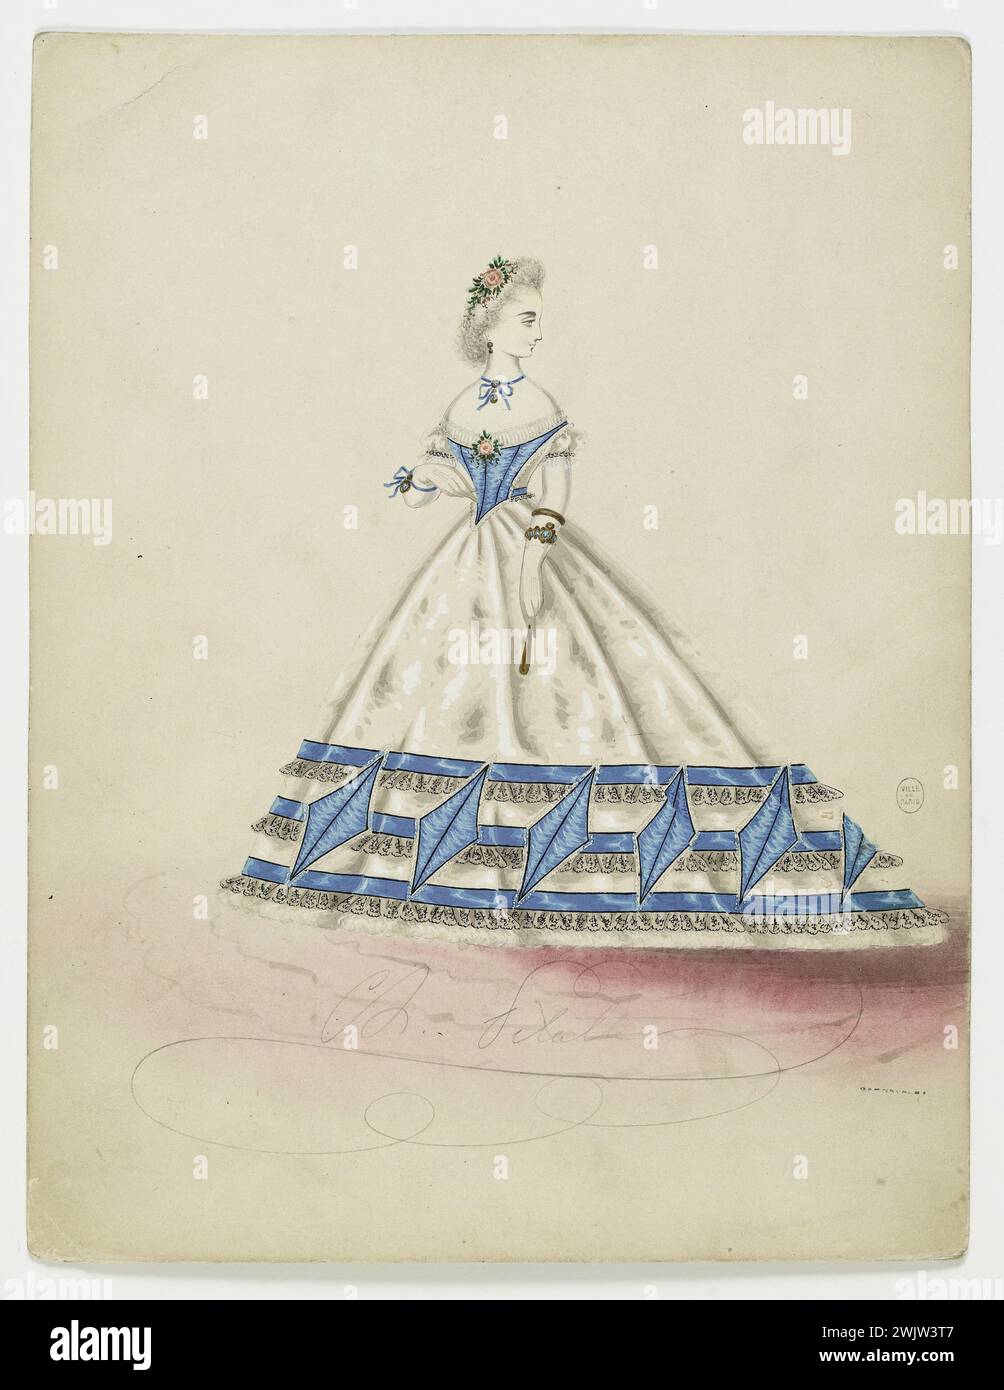 Charles Pilatte for the Ghys house. Model-figure for seamstress. Evening dress with blue bodice in a short sleeve point and neckline decorated with a rose; The bottom of the white skirt is decorated with black lace flies, braids and blue diamonds, Mrs. Ghys model. Watercolor on cardboard. 1860-1870. Galliera, fashion museum of the city of Paris. 37832-2 Watercolor on cardboard, Blue Corsage, Decollete, Flying Decree, Black Lace, In Pointe, Female, Blue Teck, Young Woman, White Skirt, Blue Losange, Ghys house, Short handle, Figure model, Feminin Model, Orne, for Couturiere, Evening dress, pink, Stock Photo